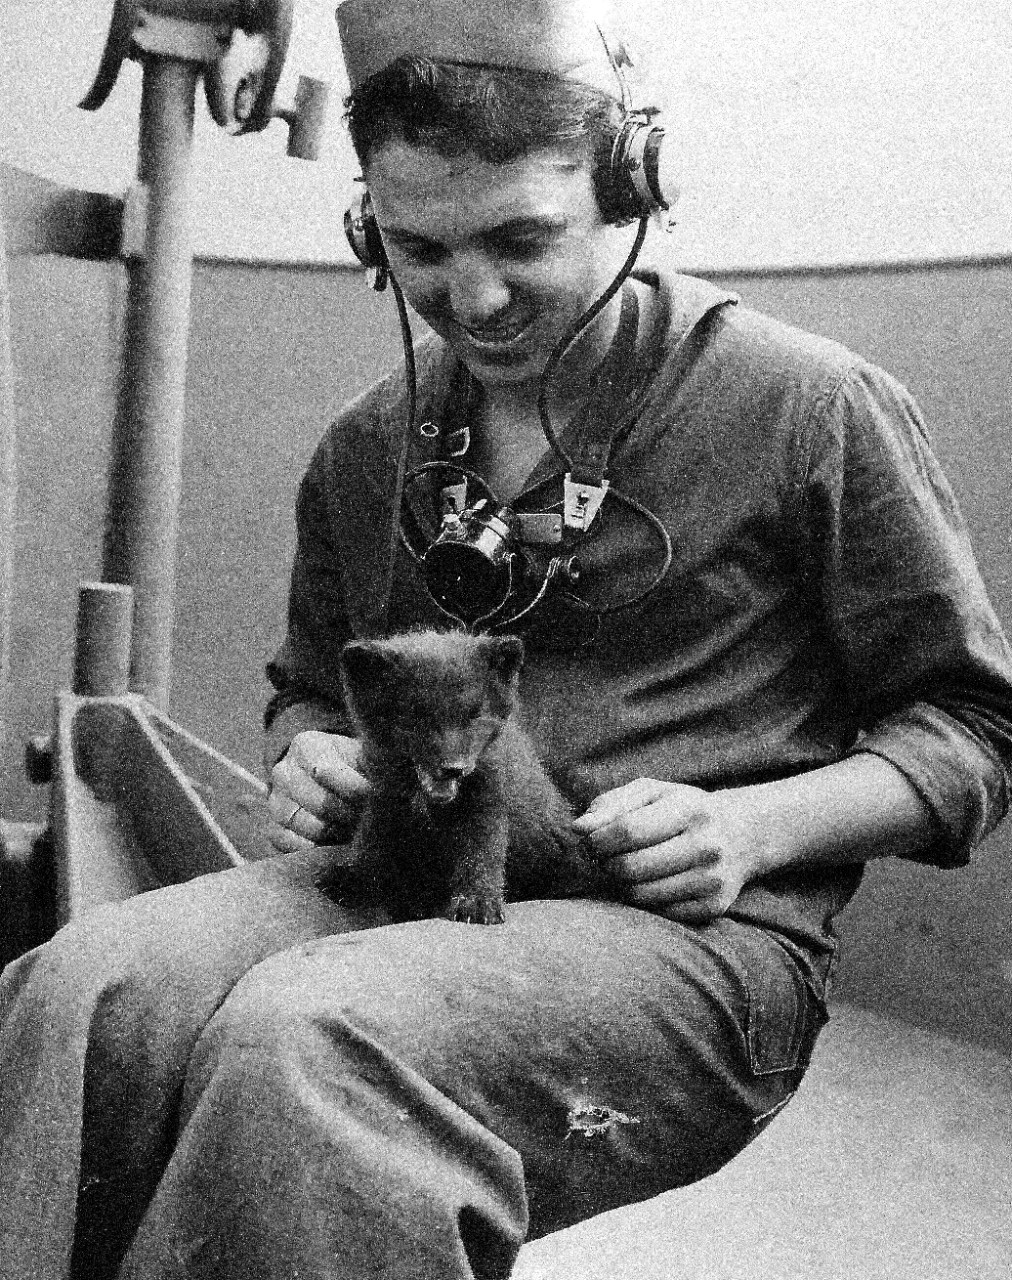 80-G-54578:  Aleutian Islands Campaign, June 1942-Augst 1943.       U.S. Navy Sailor R.E. Kailey with cub fox caught on Attu.   Photograph, August 27, 1943.   Official U.S. Navy photograph, now in the collections of the National Archives.   (2016/07/19).